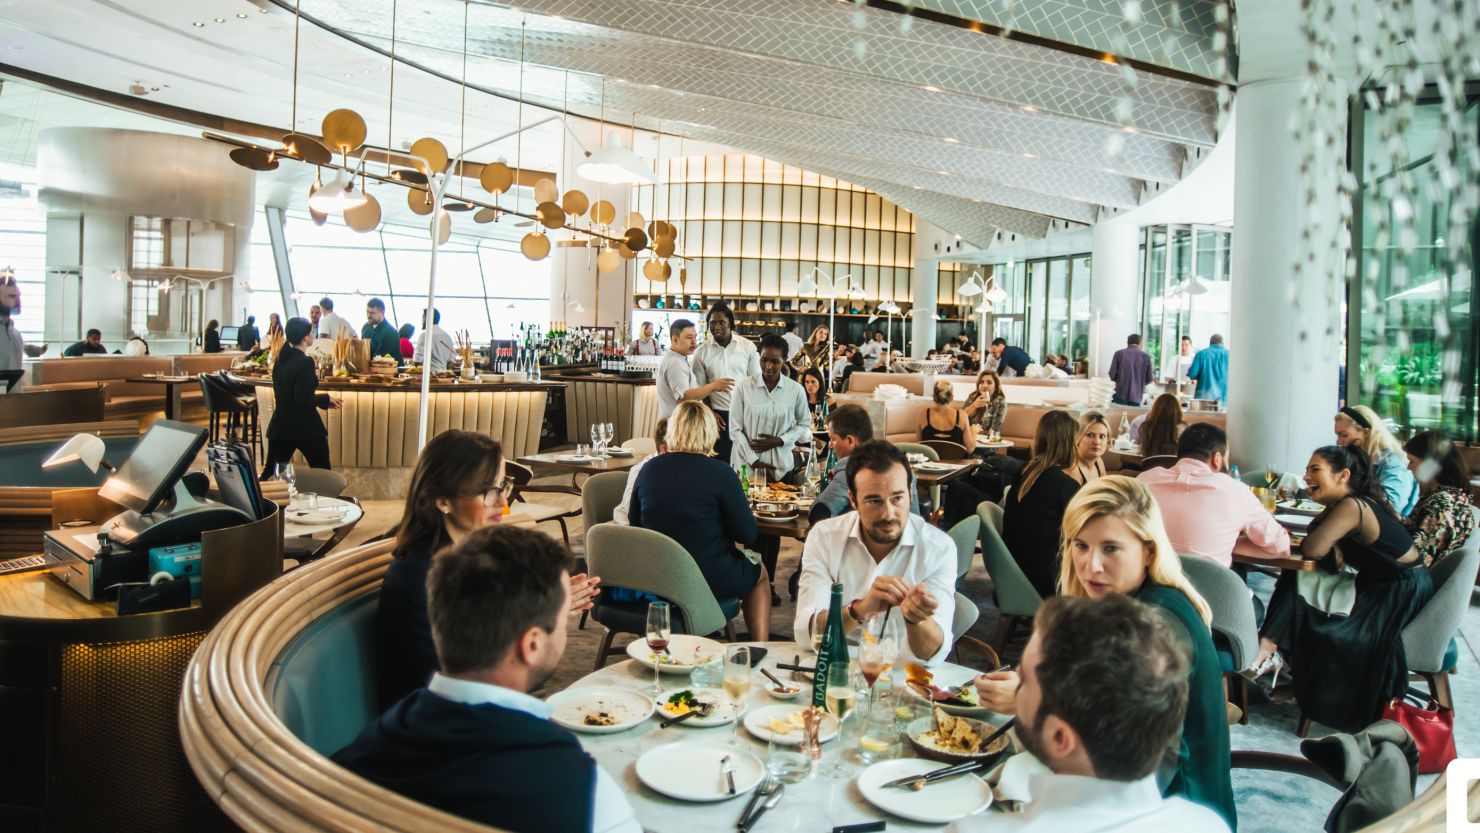 The Loft at Dubai Opera is trying to reduce the environmental impact of its brunch.